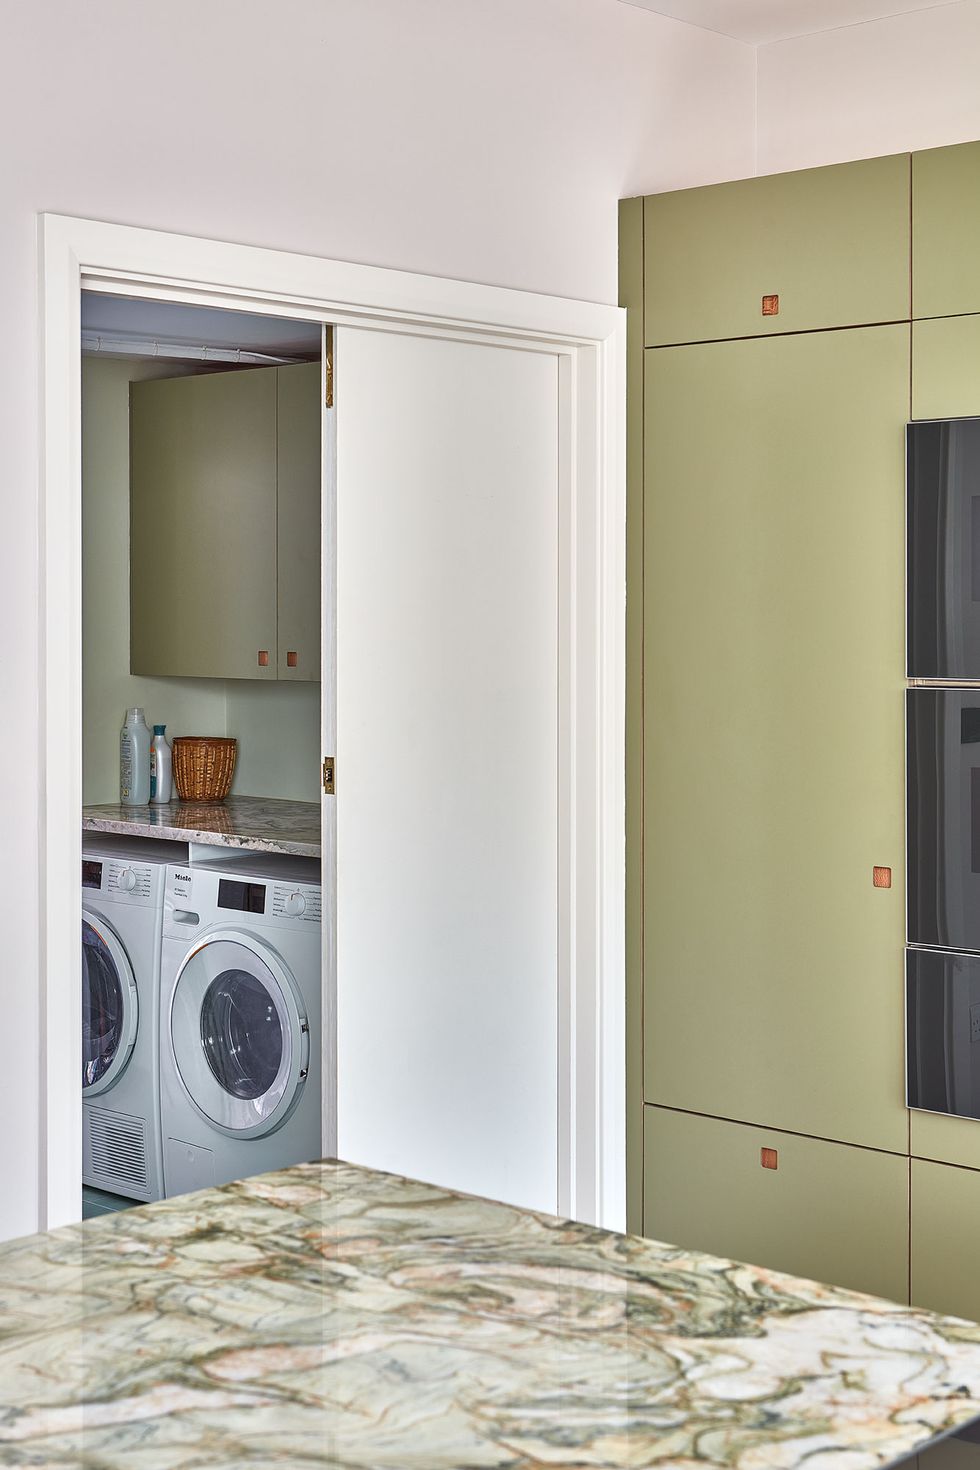 Utility Room Ideas: 23 Ways To Design This Multifunctional Space